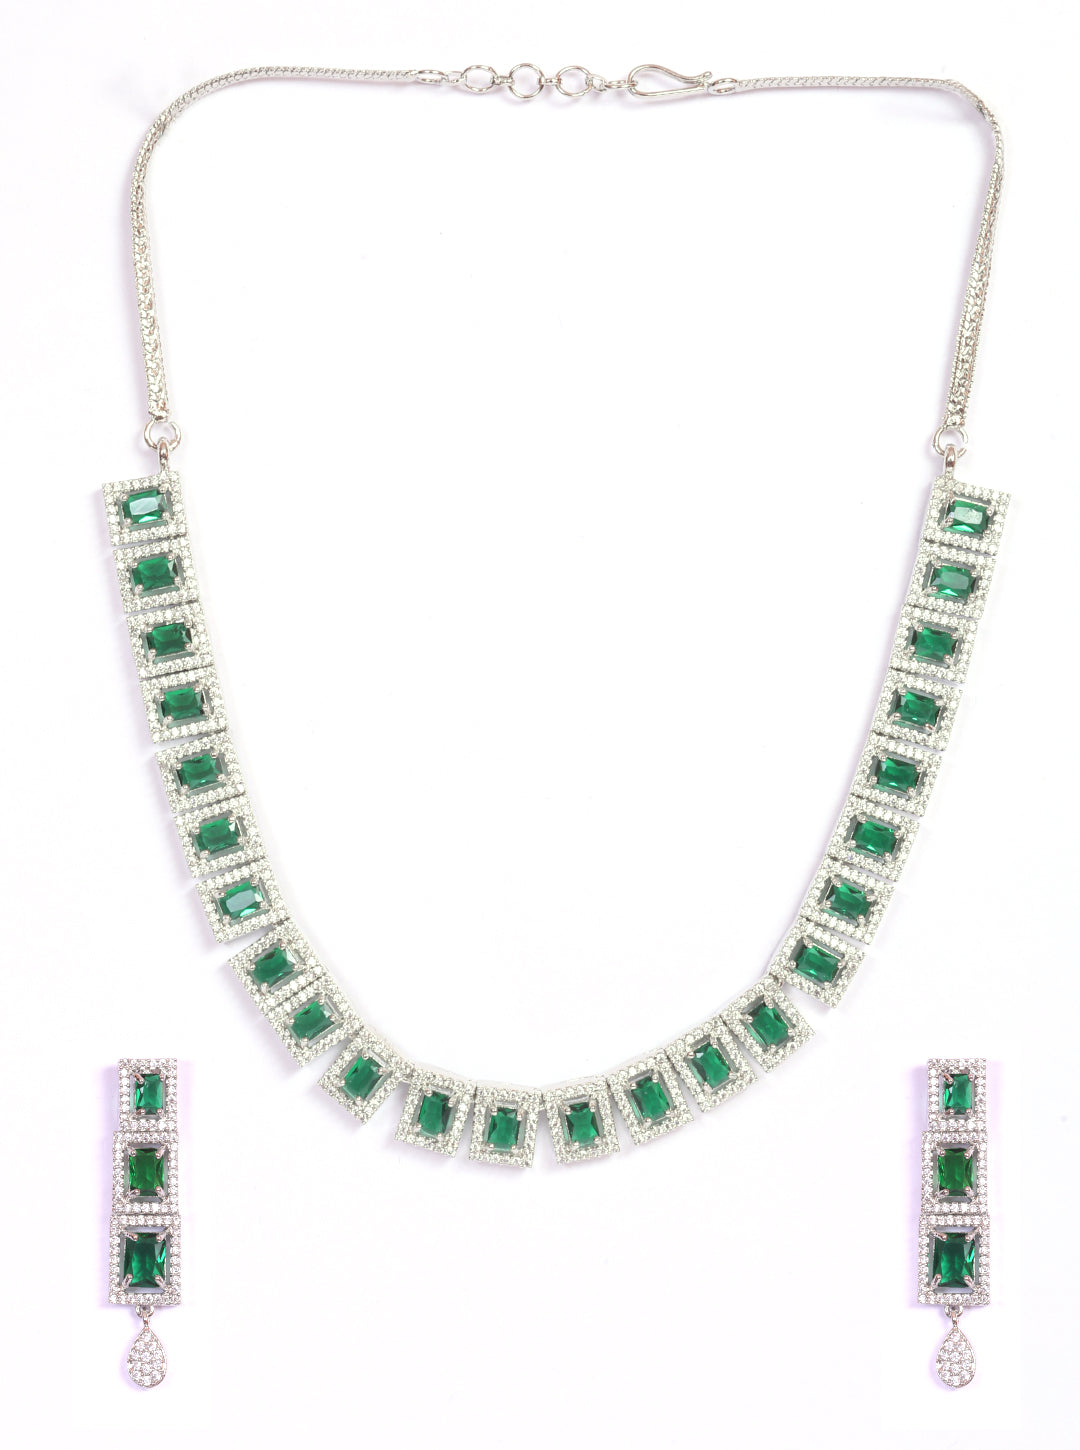 Premium White Gold Plated with sparkling Green White CZ stones Designer Necklace Set 8935N